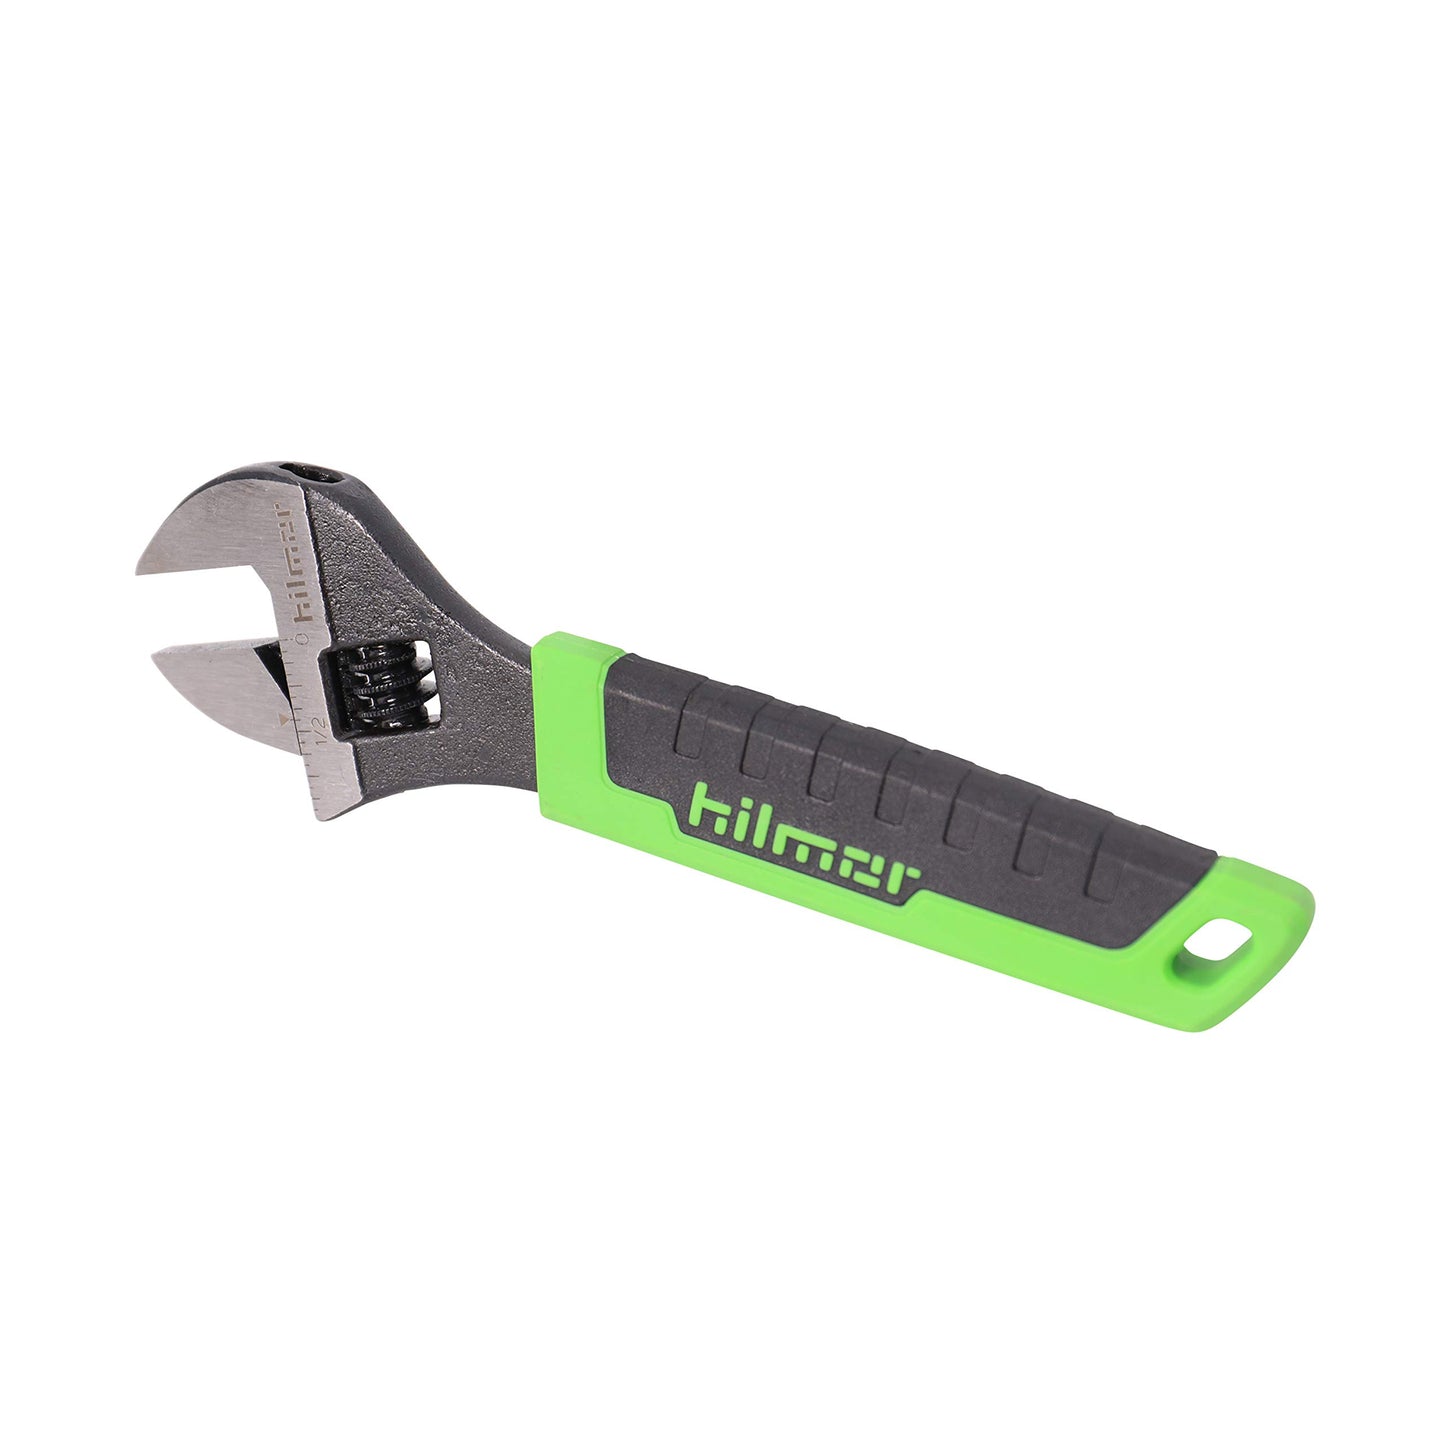 Hilmor 6" Adjustable Crescent Wrench with Rubber Handle Grip, Black & Green, AW6 1885369